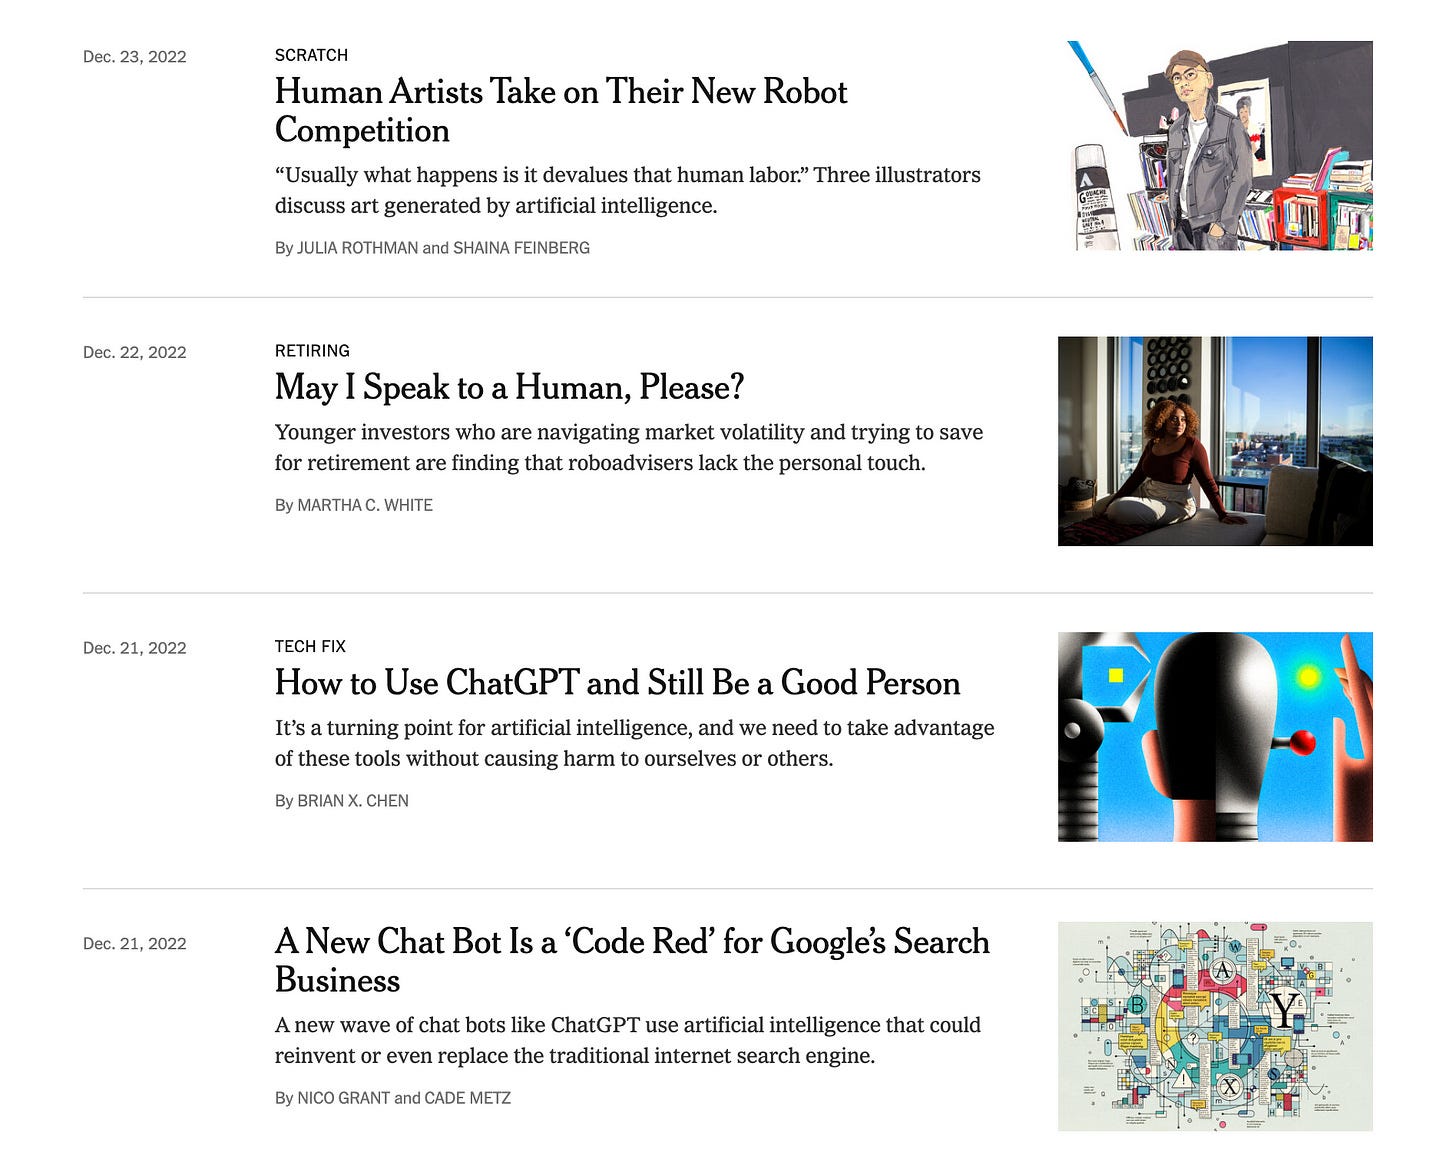 the New York Times being pessimistic about AI